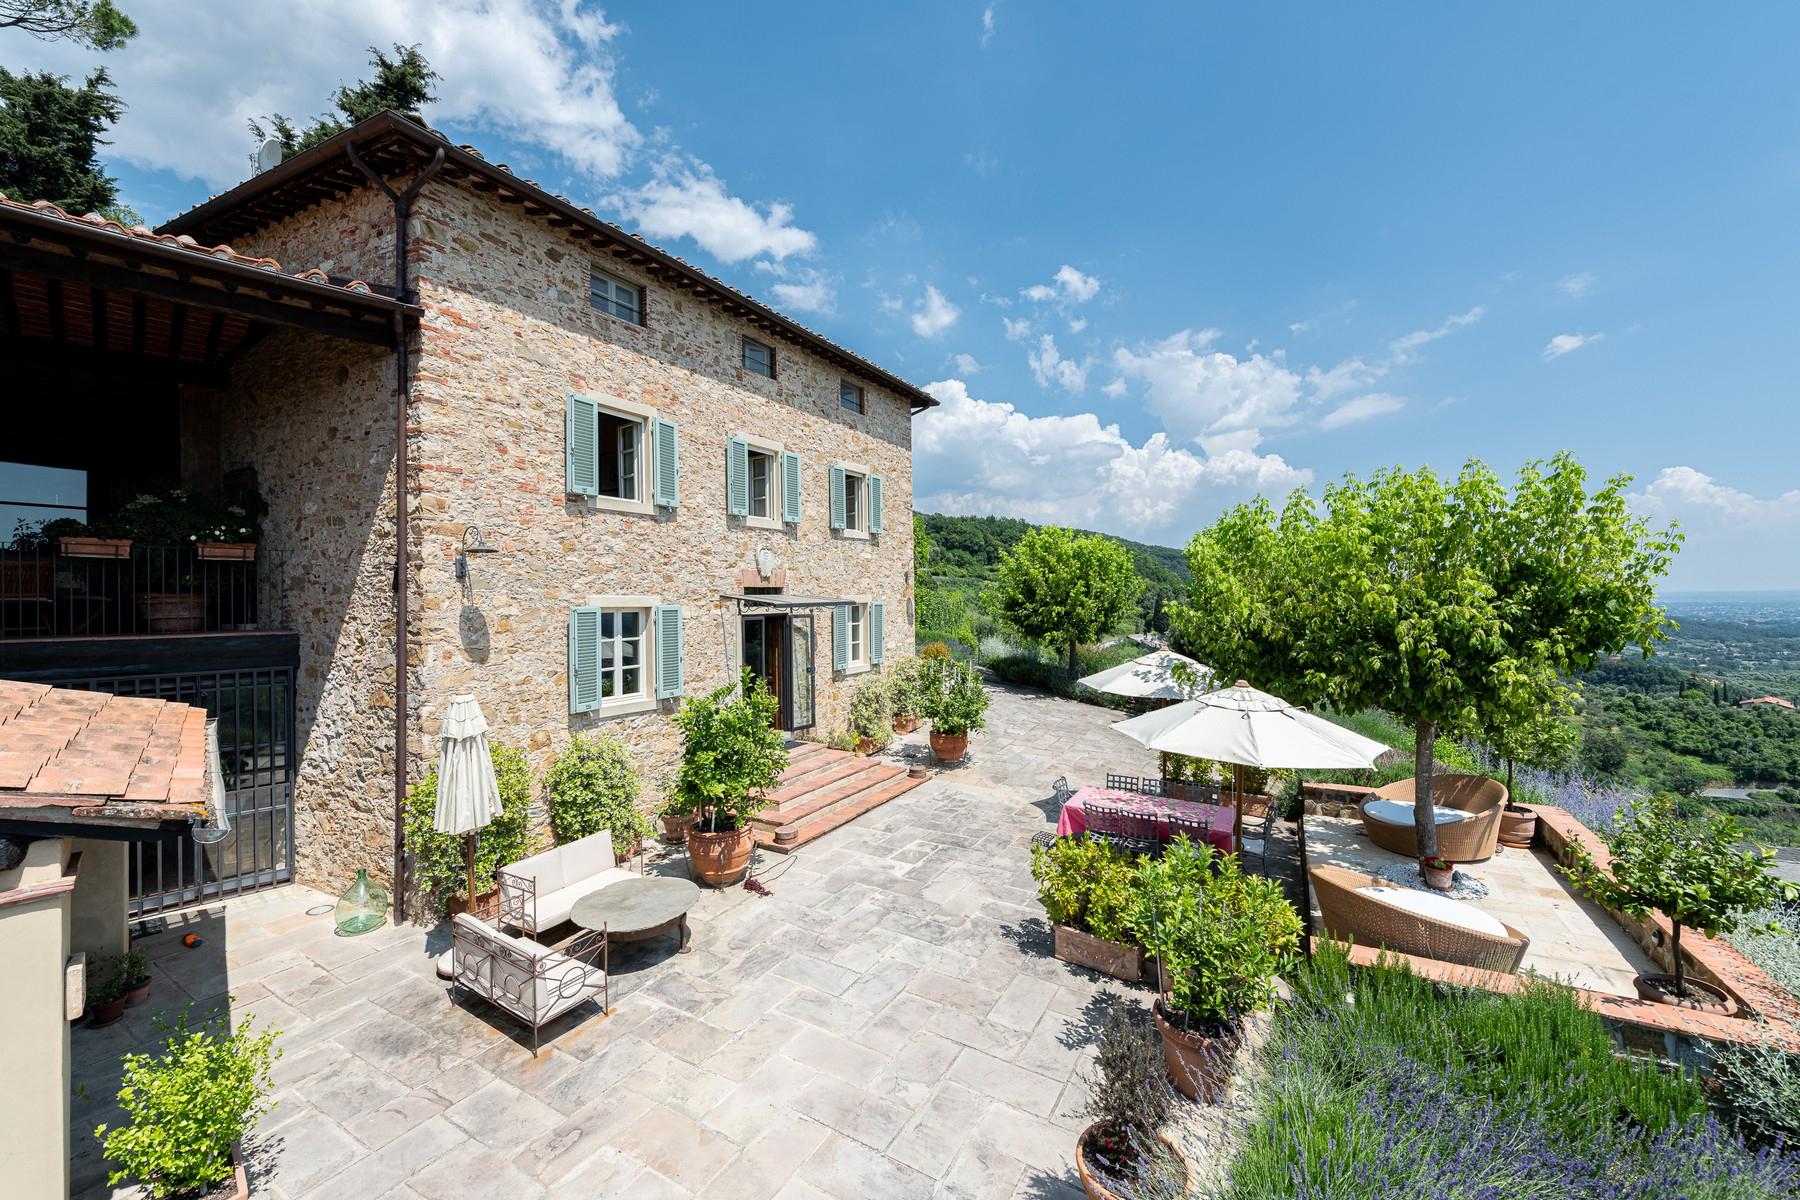 Magical farmhouse with stunning views on the hills of Lucca - 3